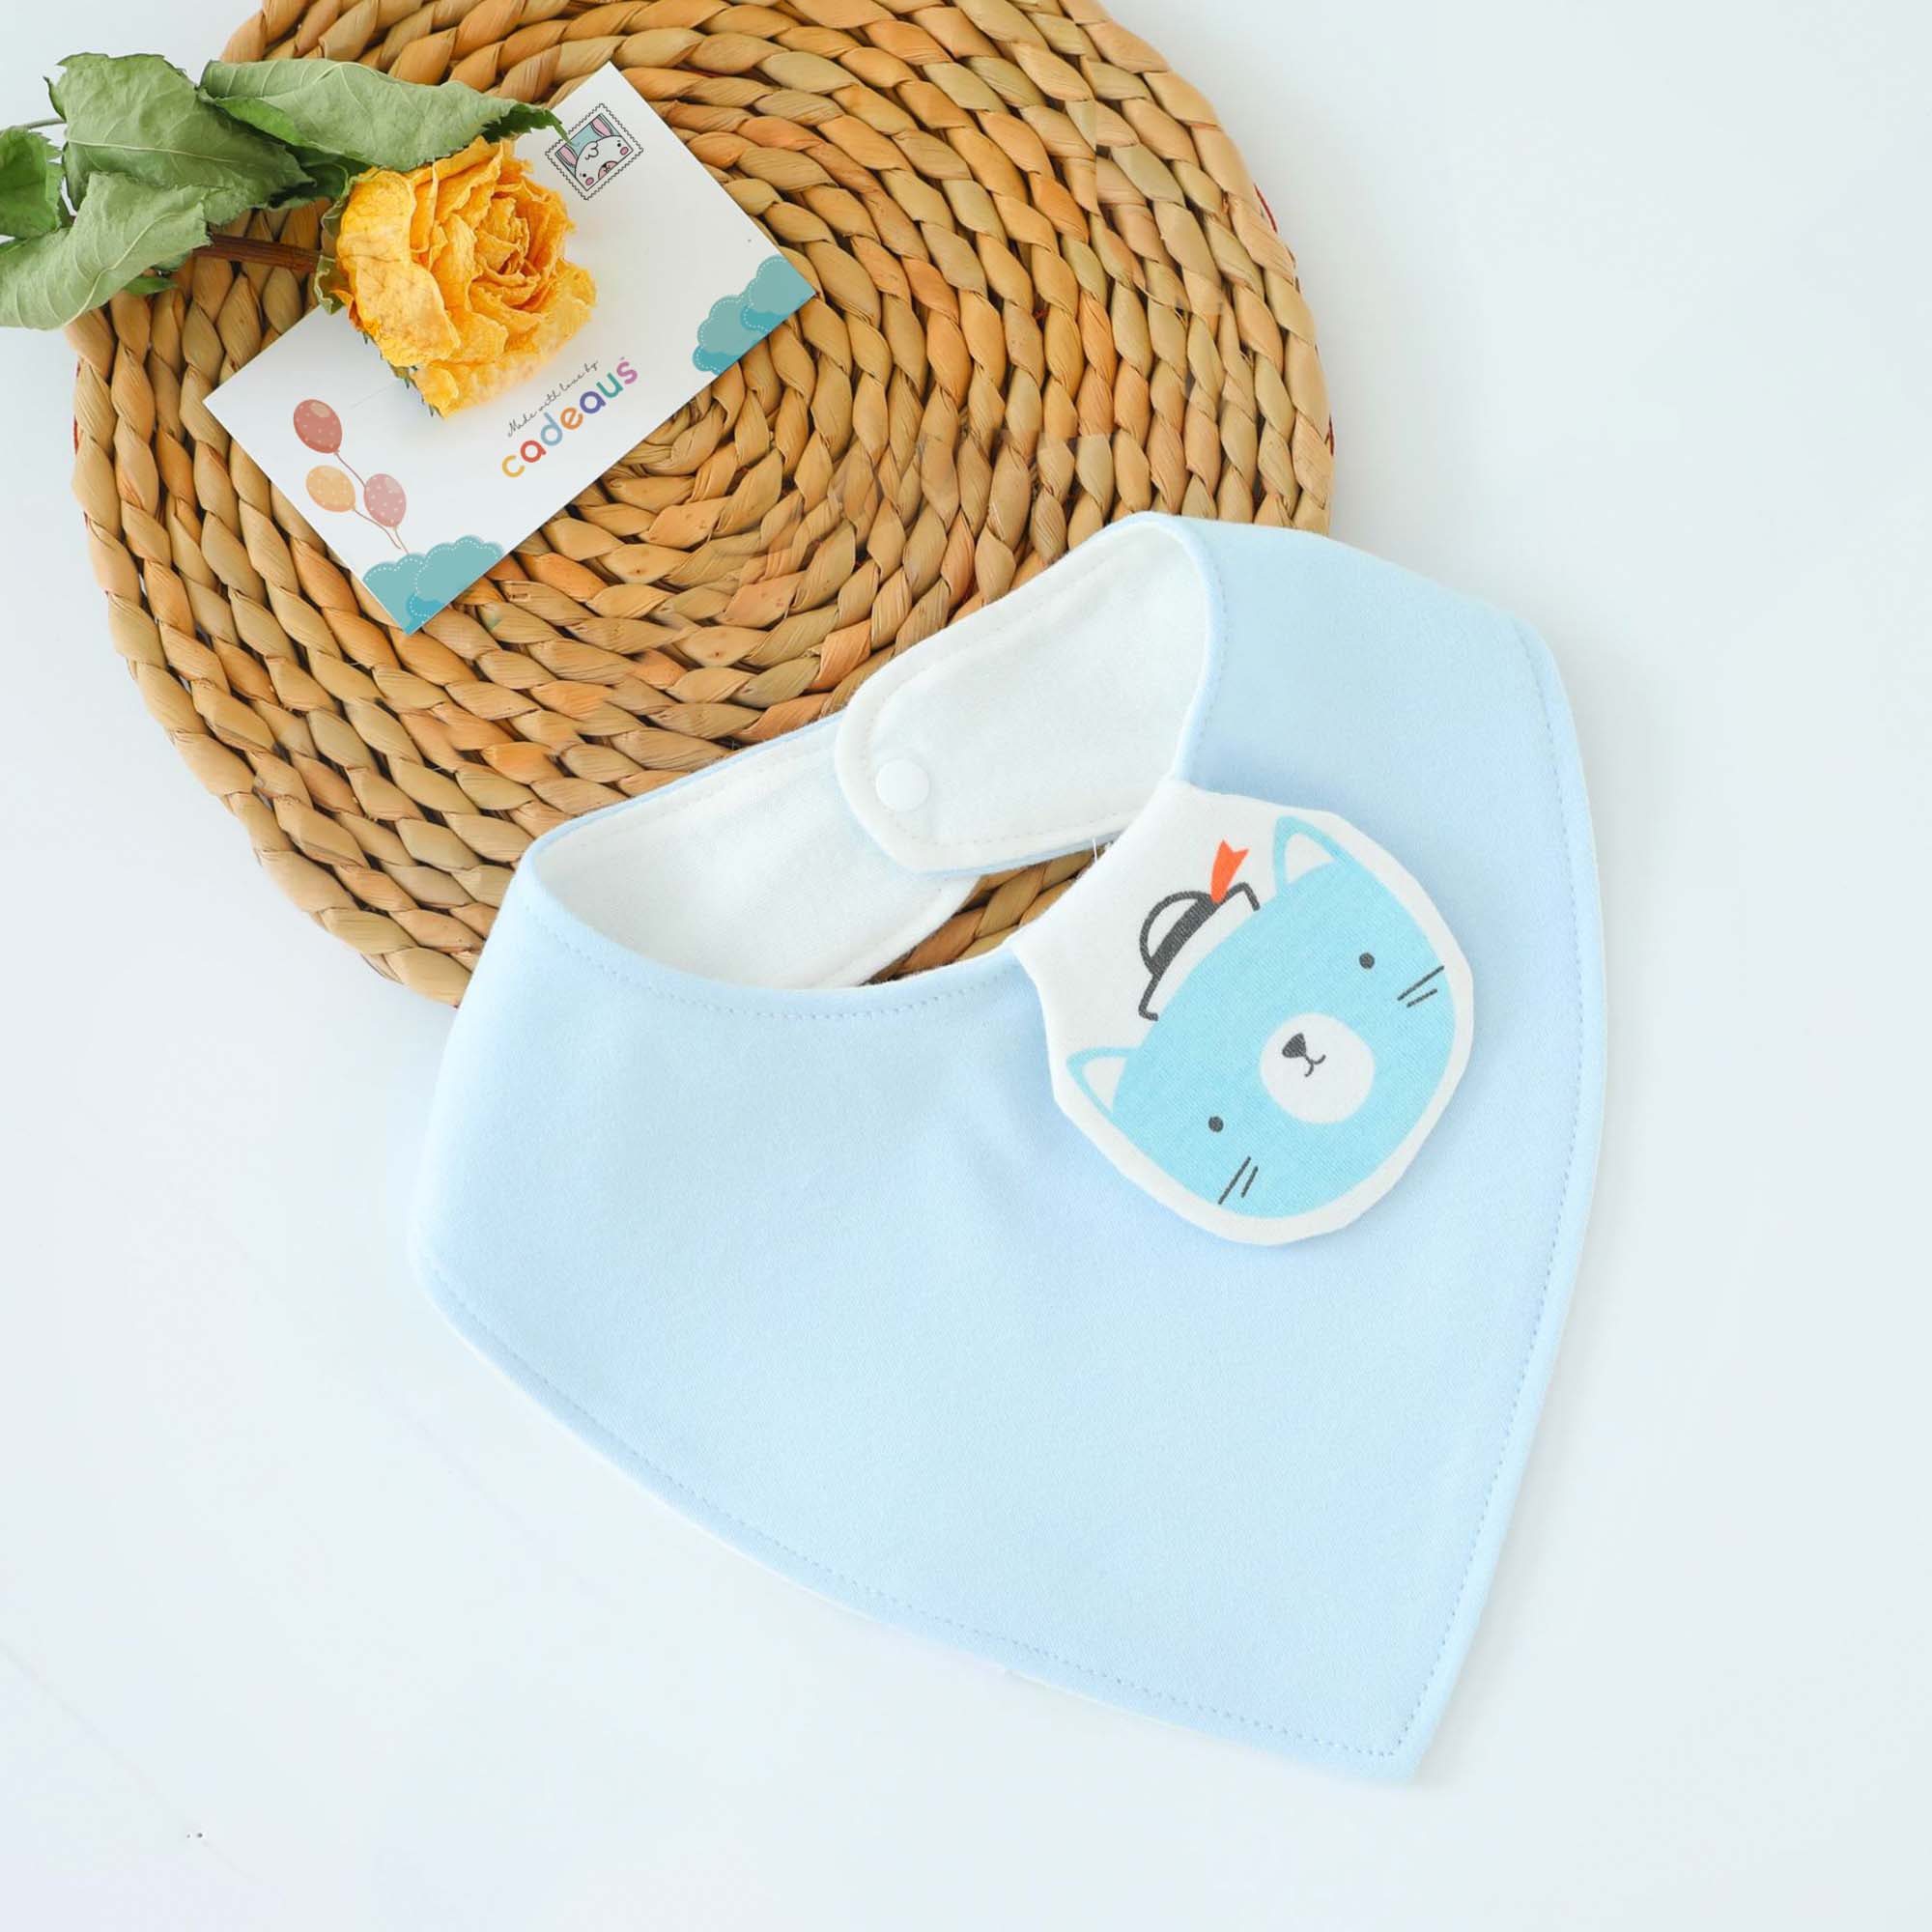 A blue kitty design baby bib with Cadeaus gift card